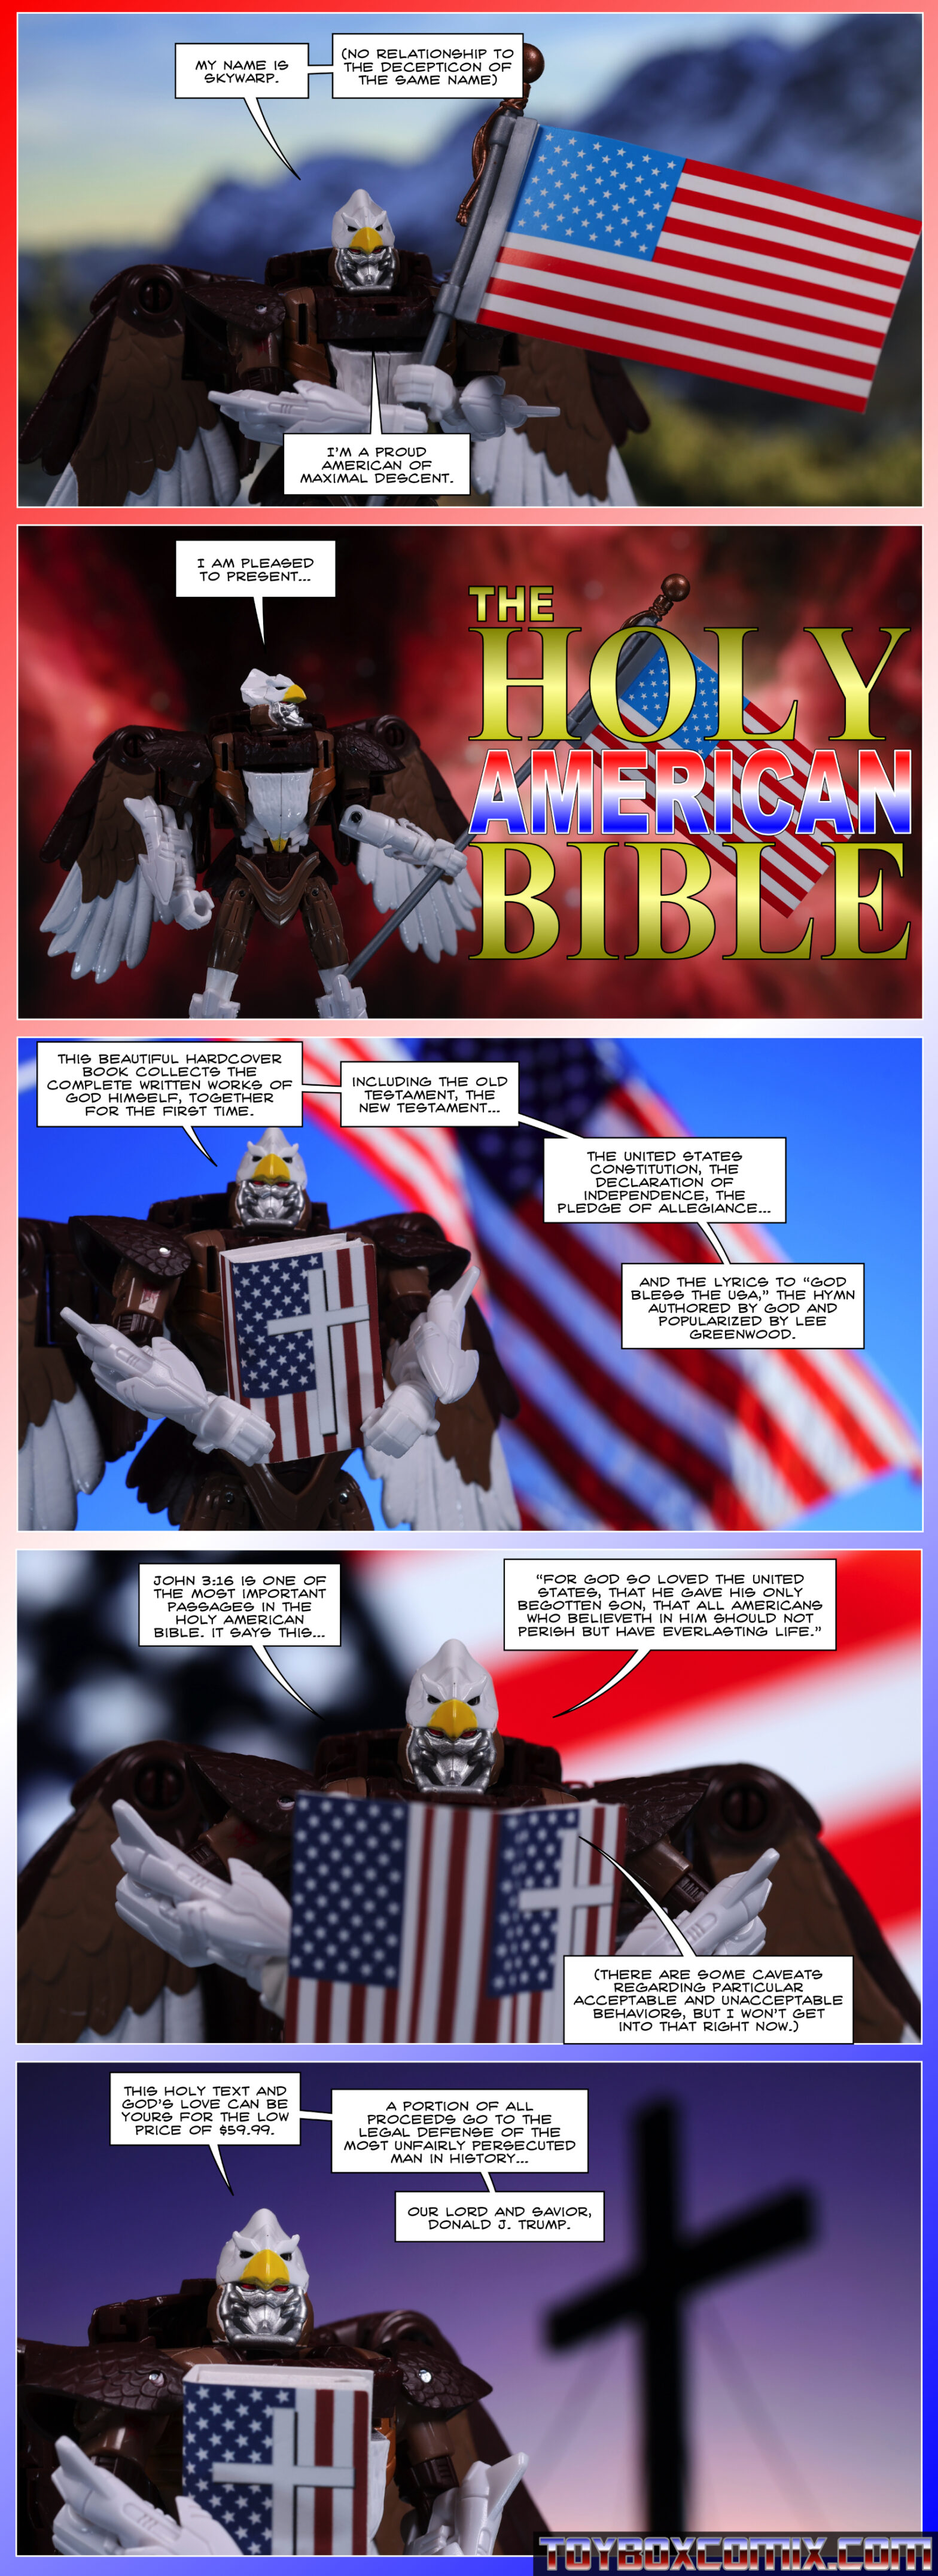 First panel: Maximal Skywarp holding an American flag: “My name is Skywarp. (No relationship to the Decepticon of the same name.) I’m a proud American of Maximal descent.” 2: Skywarp: “I am pleased to present…” Dramatic text: “The Holy American Bible” 3: Skywarp, holding a gaudy book with an American flag and a cross: “This beautiful hardcover book collects the complete written works of God himself, together for the first time. Including the Old Testament, the New Testament, the United States constitution, the Declaration of Independence, the Pledge of Allegiance, and the lyrics of ‘God Bless the USA,’ the hymn authored by God and popularized by Lee Greenwood.” 4: Skywarp: “John 3:16 is one of the most important passages in the Holy American Bible. It says this…’For God so loved the United States, that he gave his only begotten son, that all Americans who believeth in Him should not perish but have everlasting life.’ (There are some caveats regarding particular acceptable and unacceptable behaviors, but I won’t get into that right now.) 5: Skywarp: “This holy text and God’s love can be yours for the low price of $59.99. A portion of all proceeds go to the legal defense of the most unfairly persecuted man in history, our lord and savior, Donald J. Trump.”